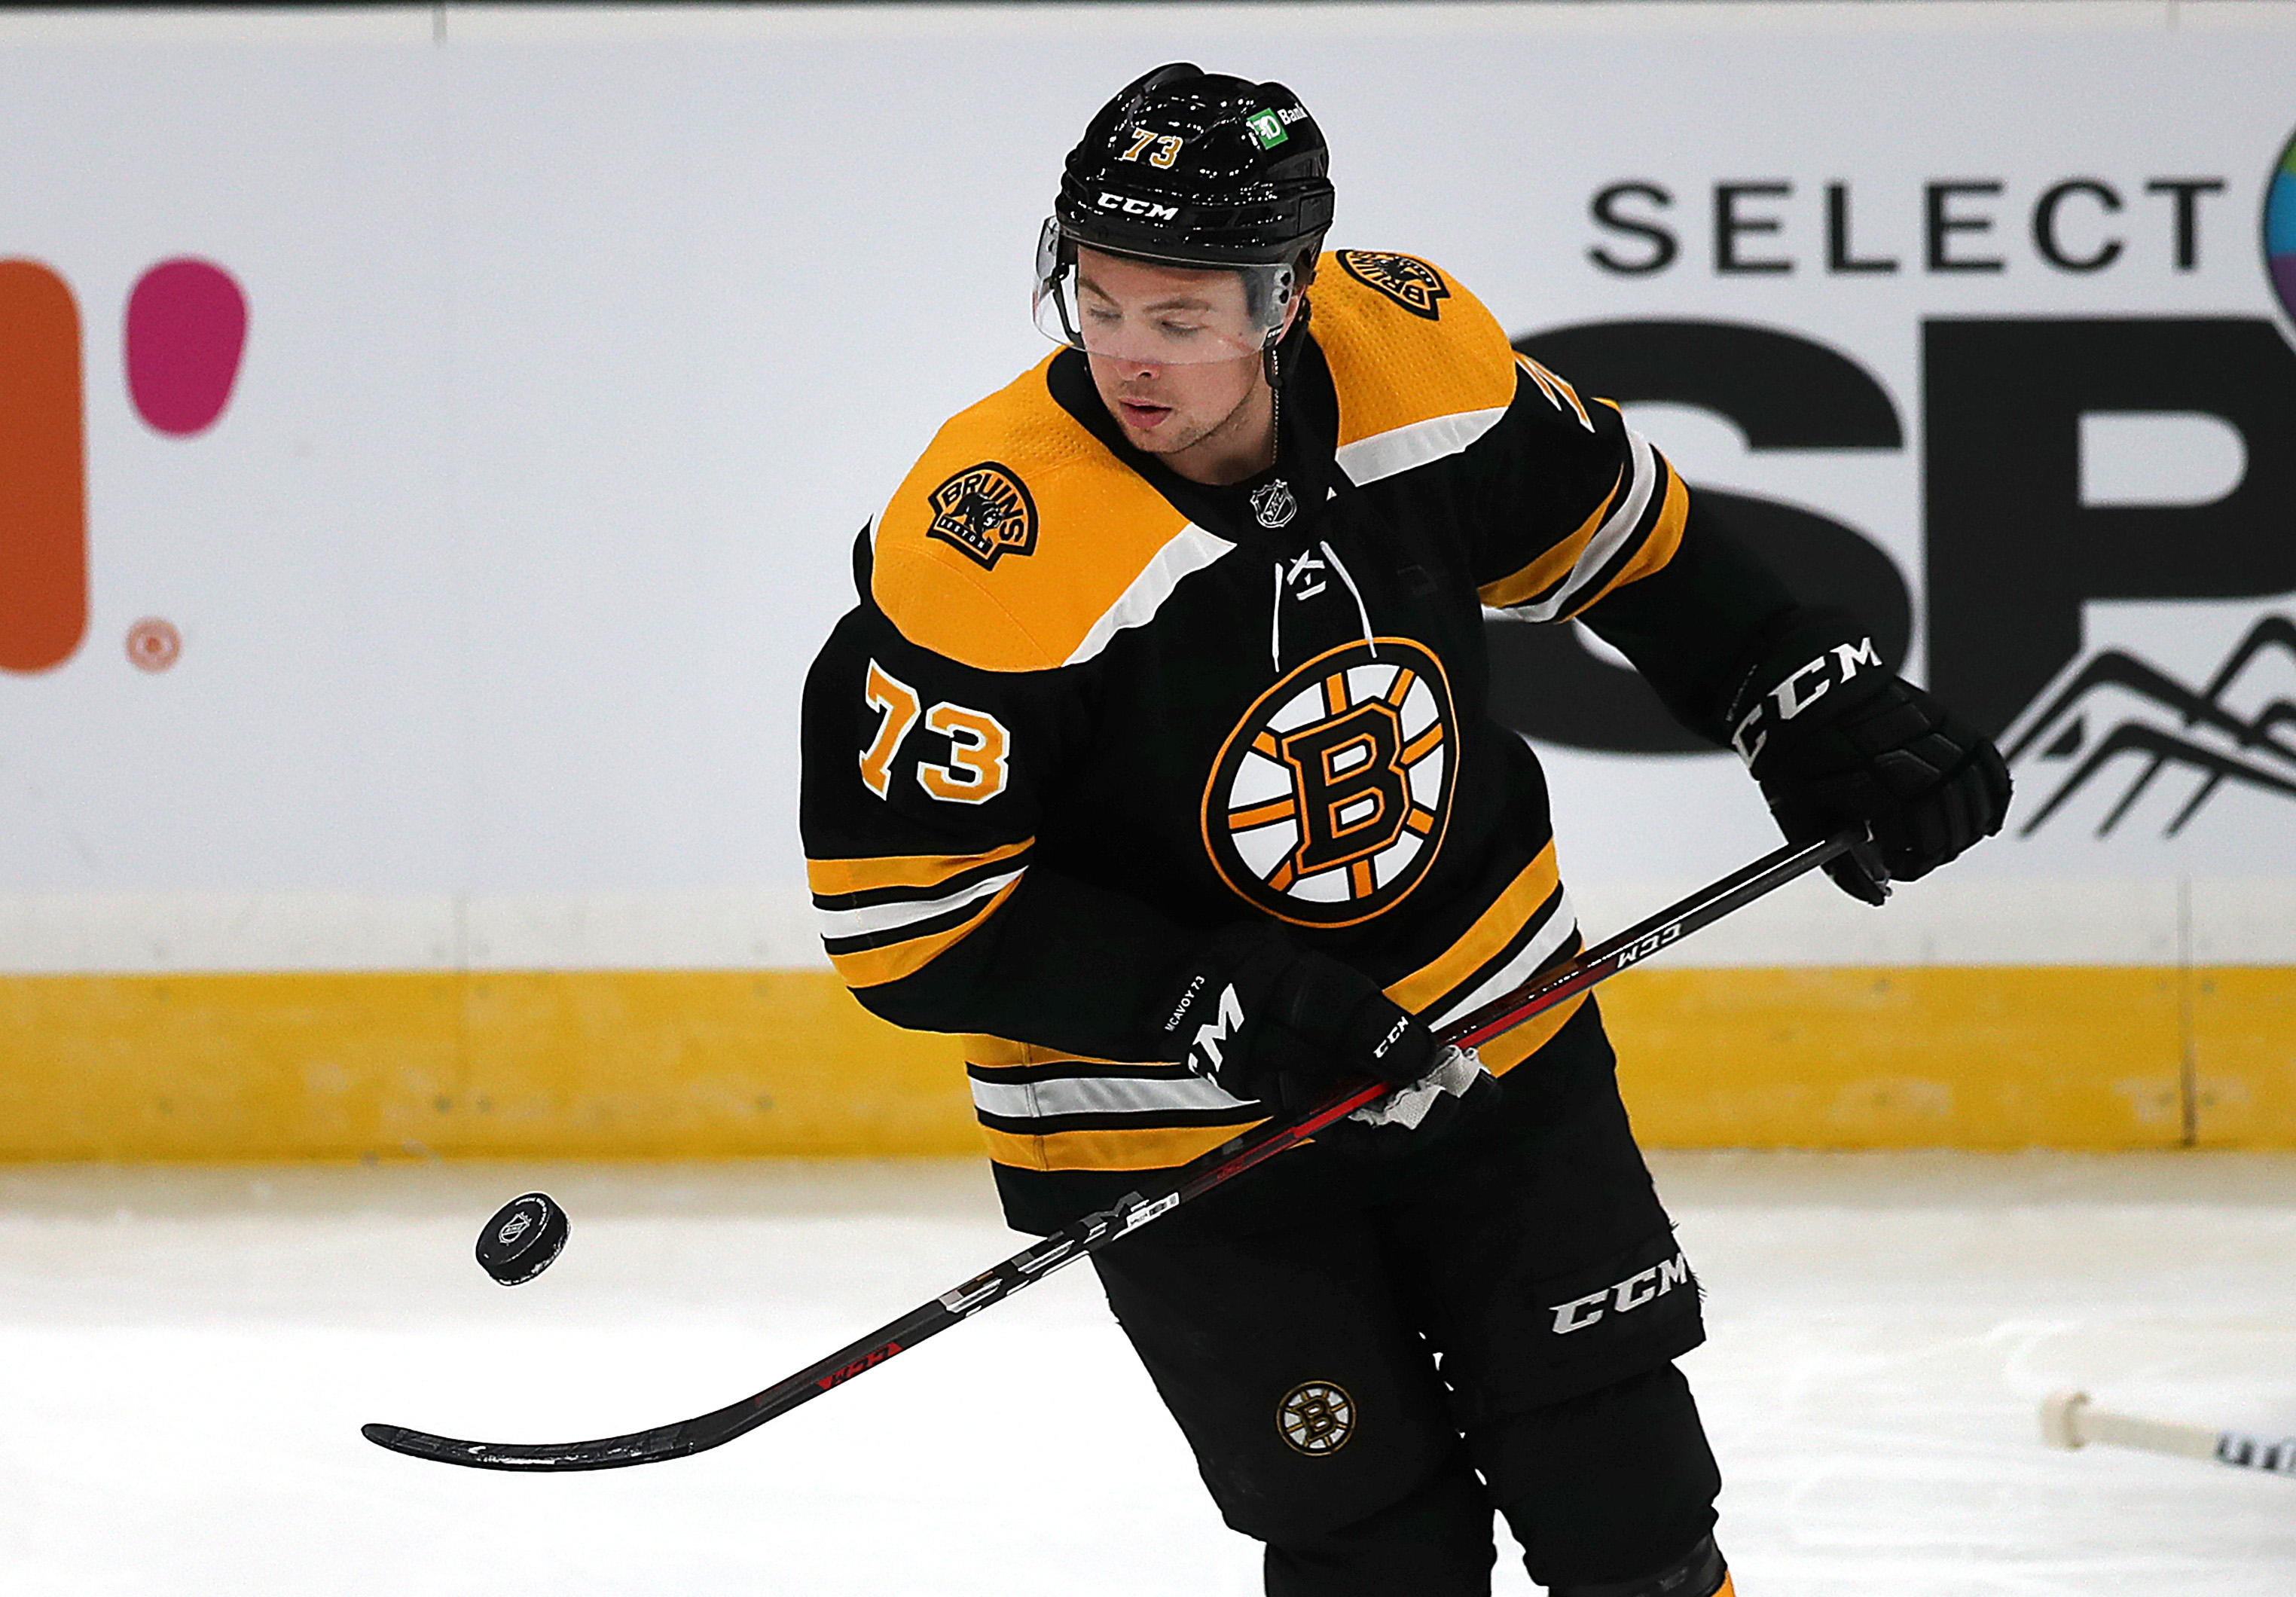 Charlie McAvoy ahead of schedule, dons regular jersey at Bruins